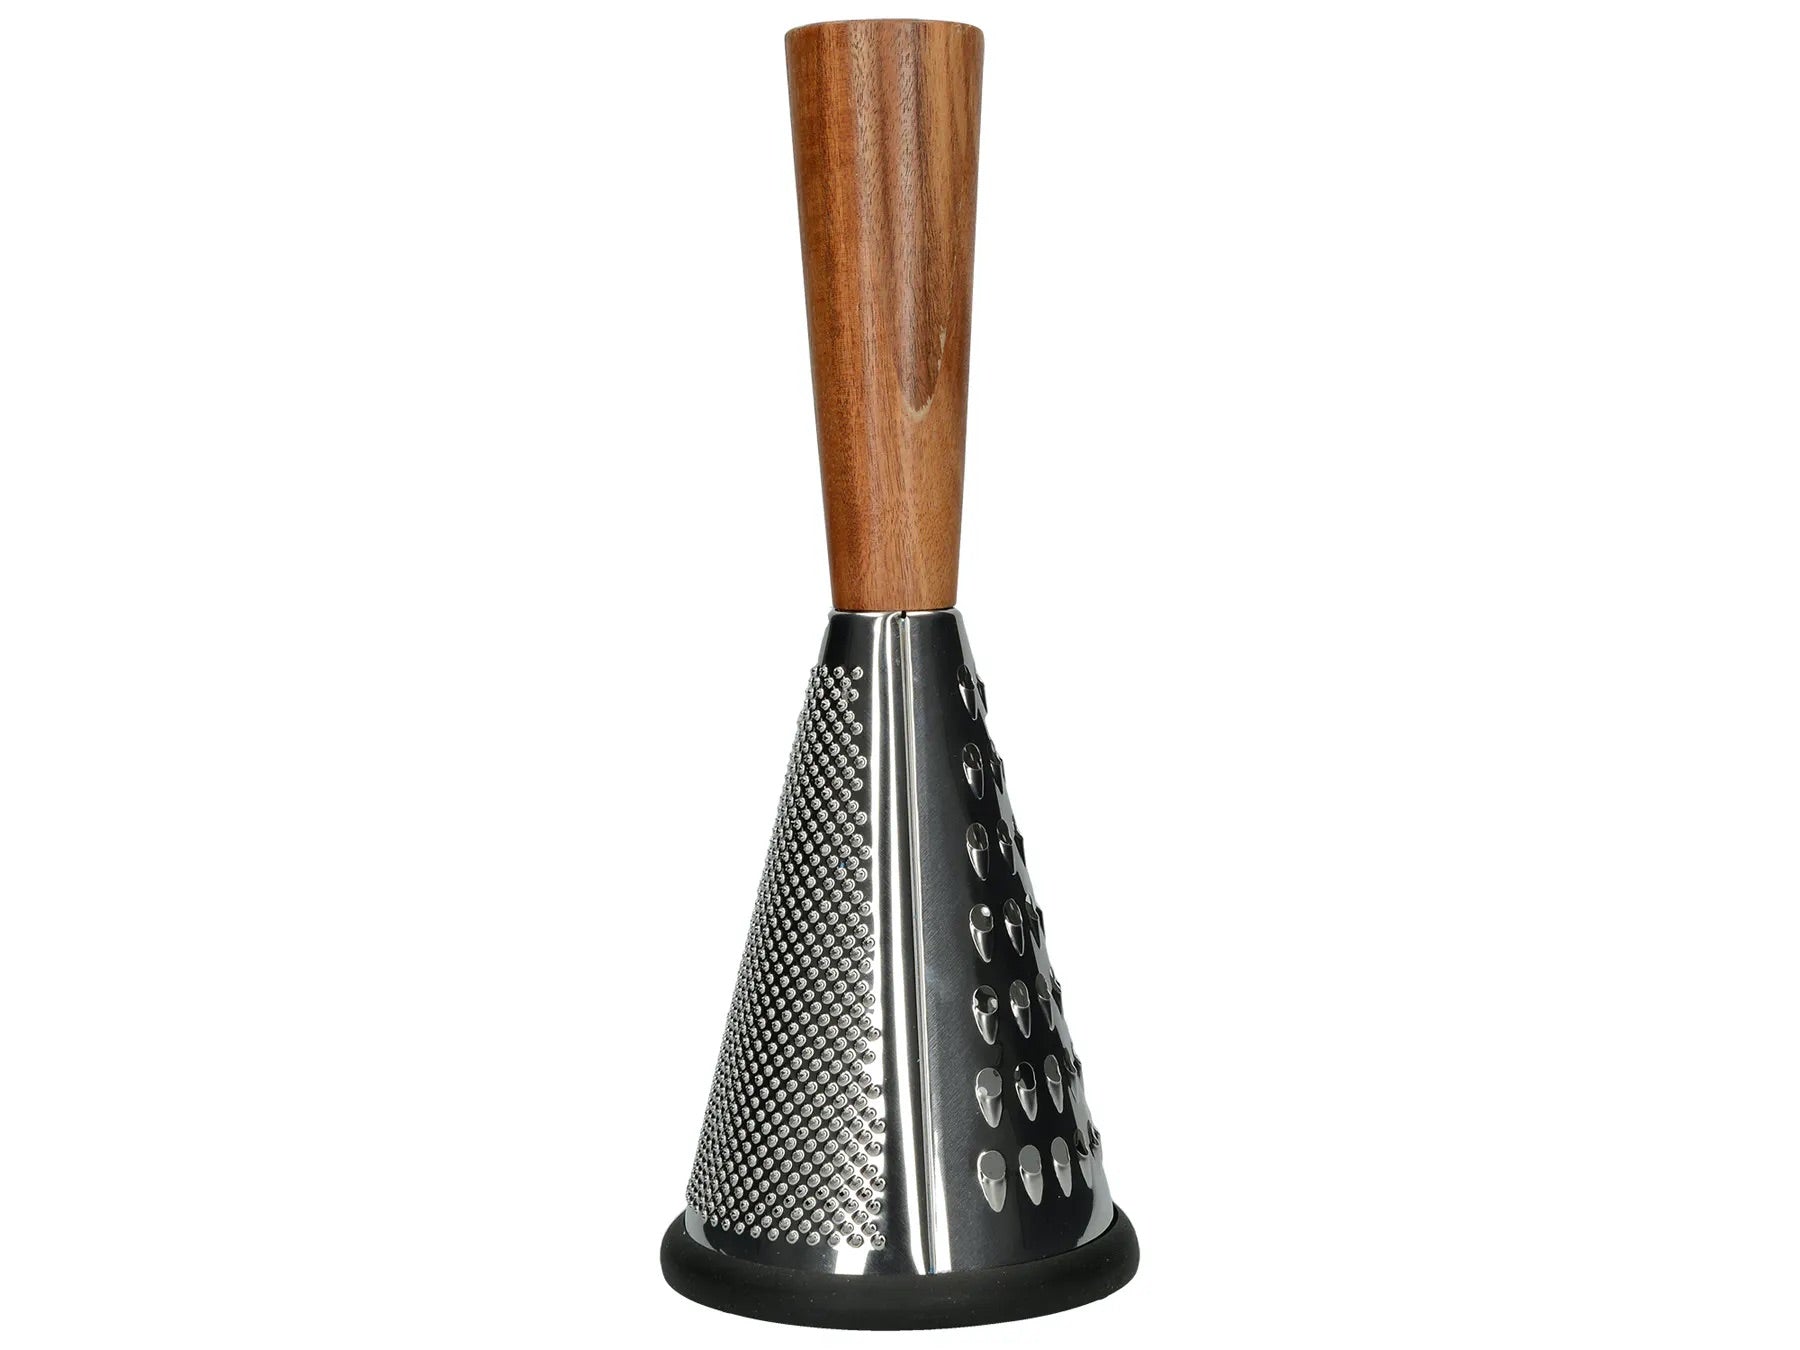 Creative Tops Cheese Grater With Acacia Wooden Handle - Small